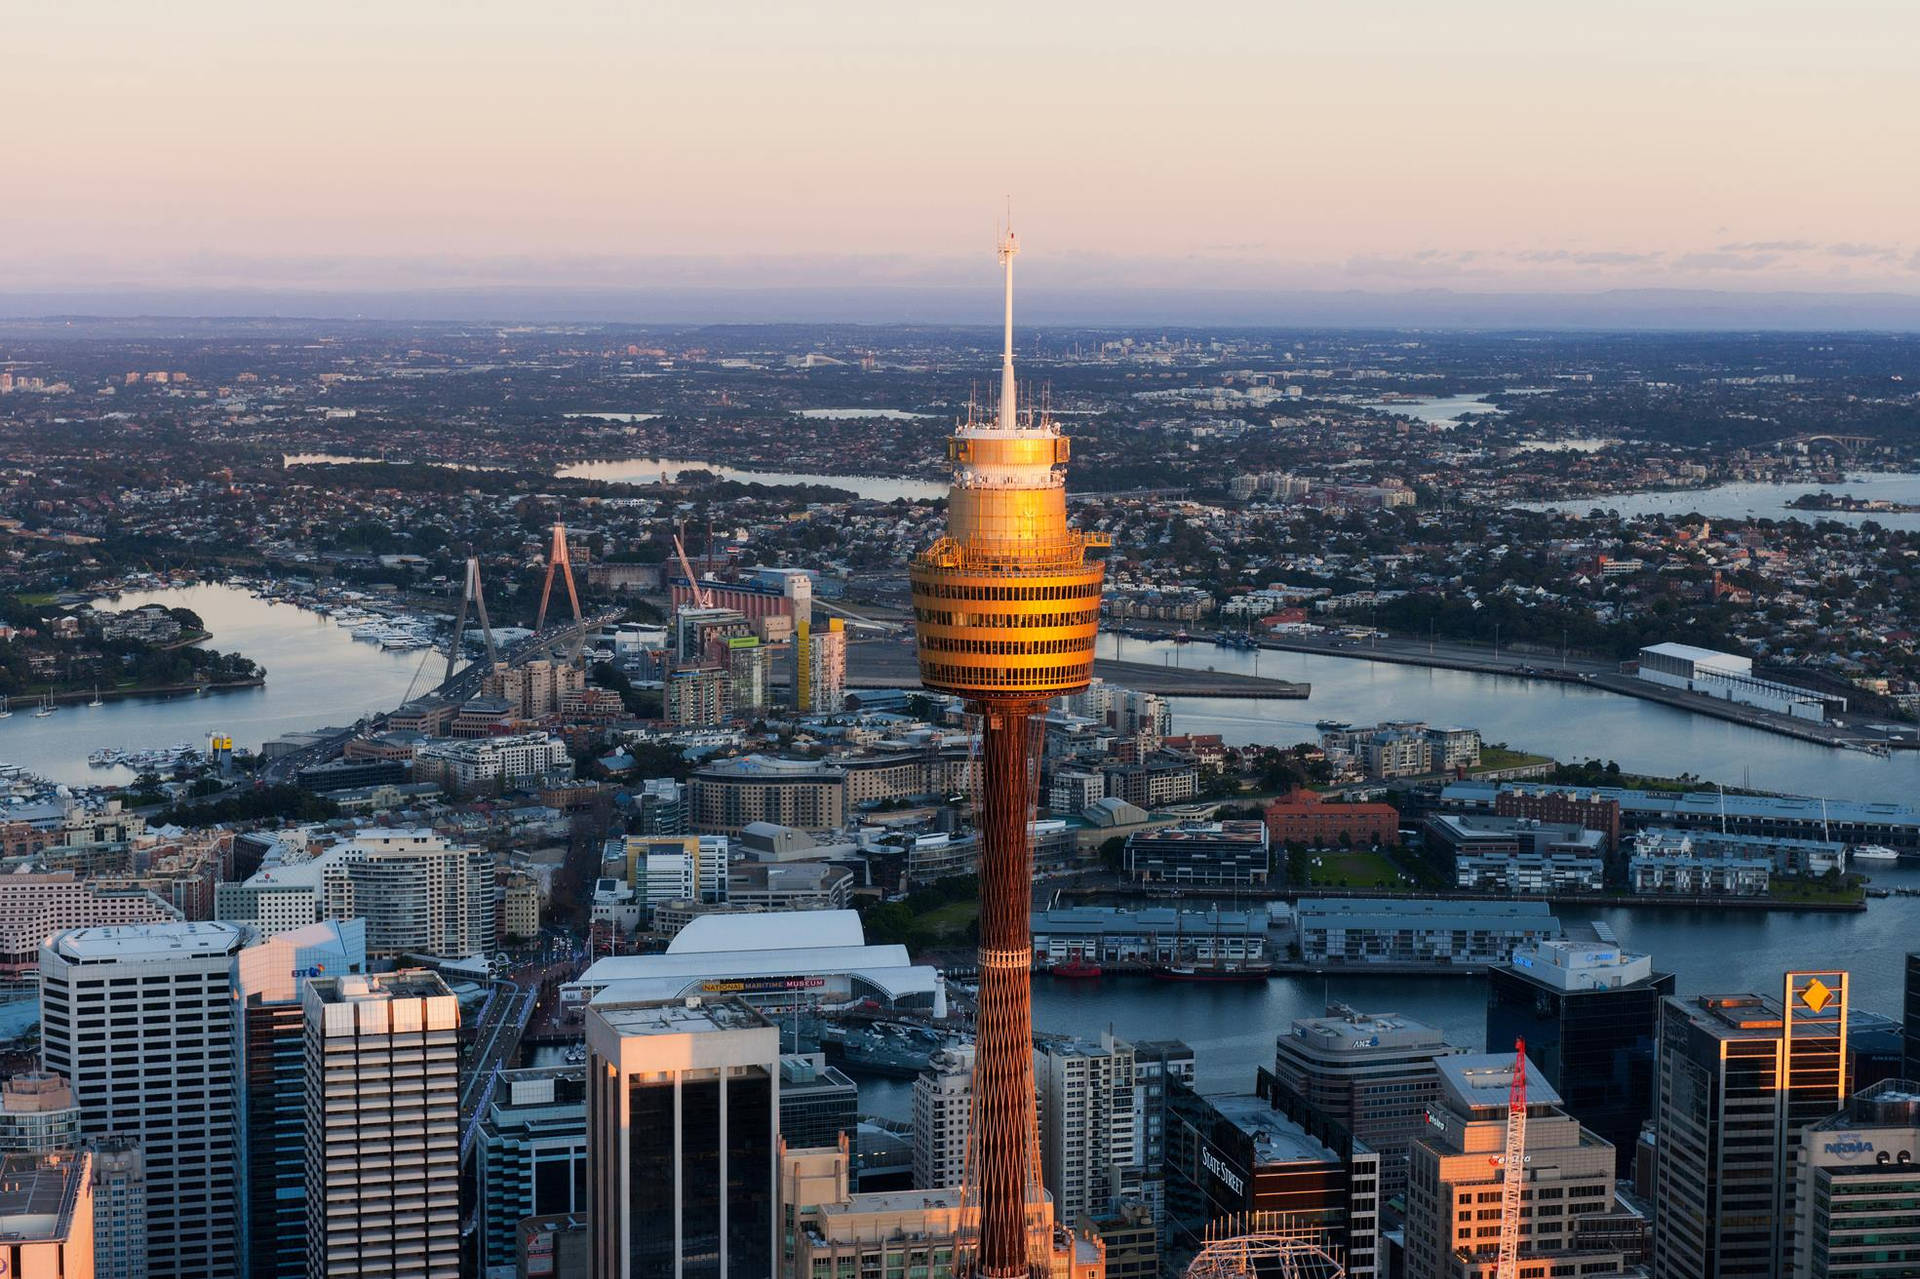 Magnificent View Of The Sydney Tower Eye Amidst The Vibrant Cityscape.